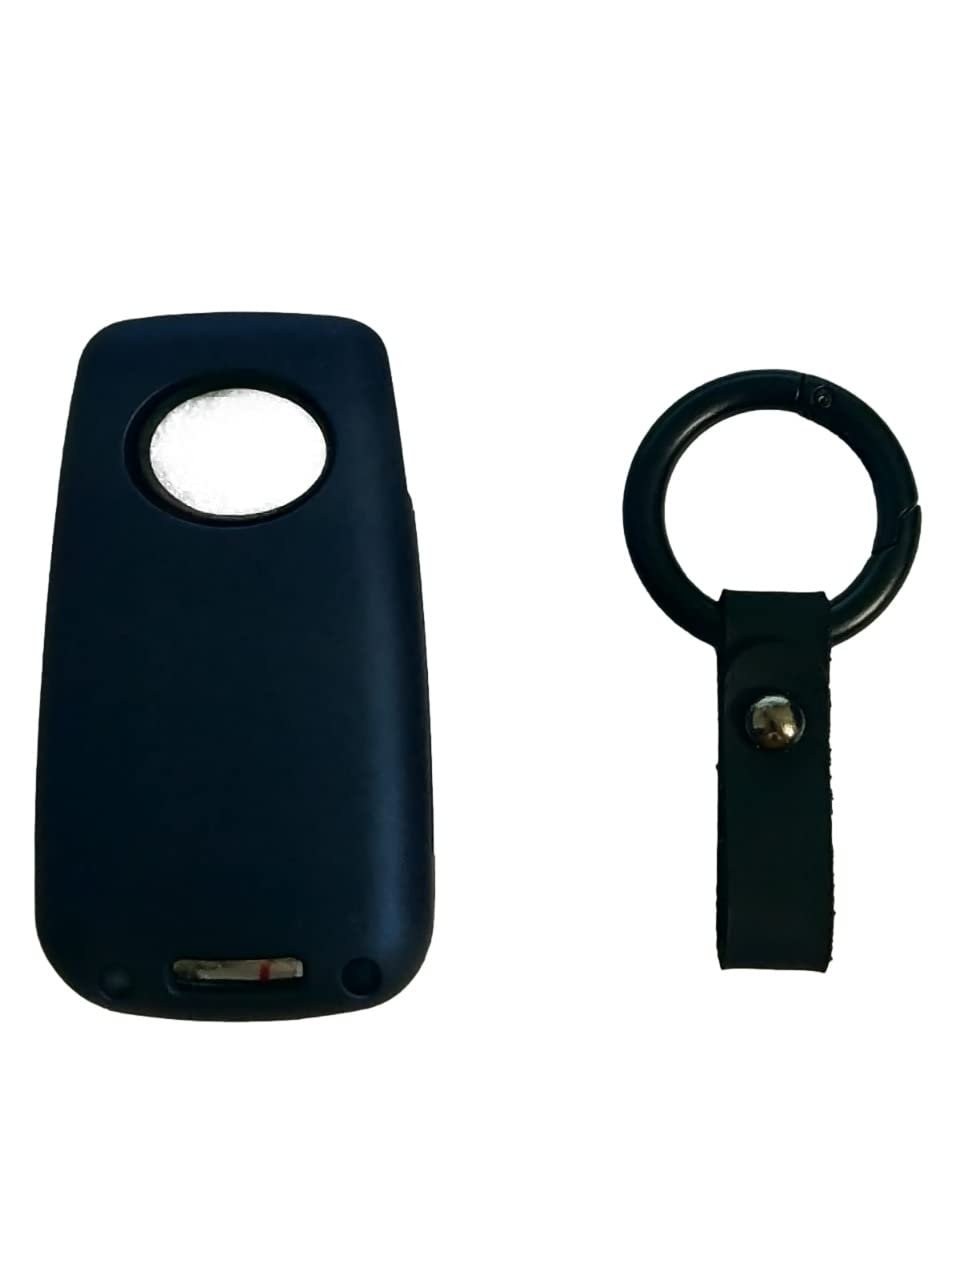 Blue Fiber Style Car Key Cover Compatible with Toyota Corolla Altis Innova Crysta 3 Button Flip Key Cover (Blue)